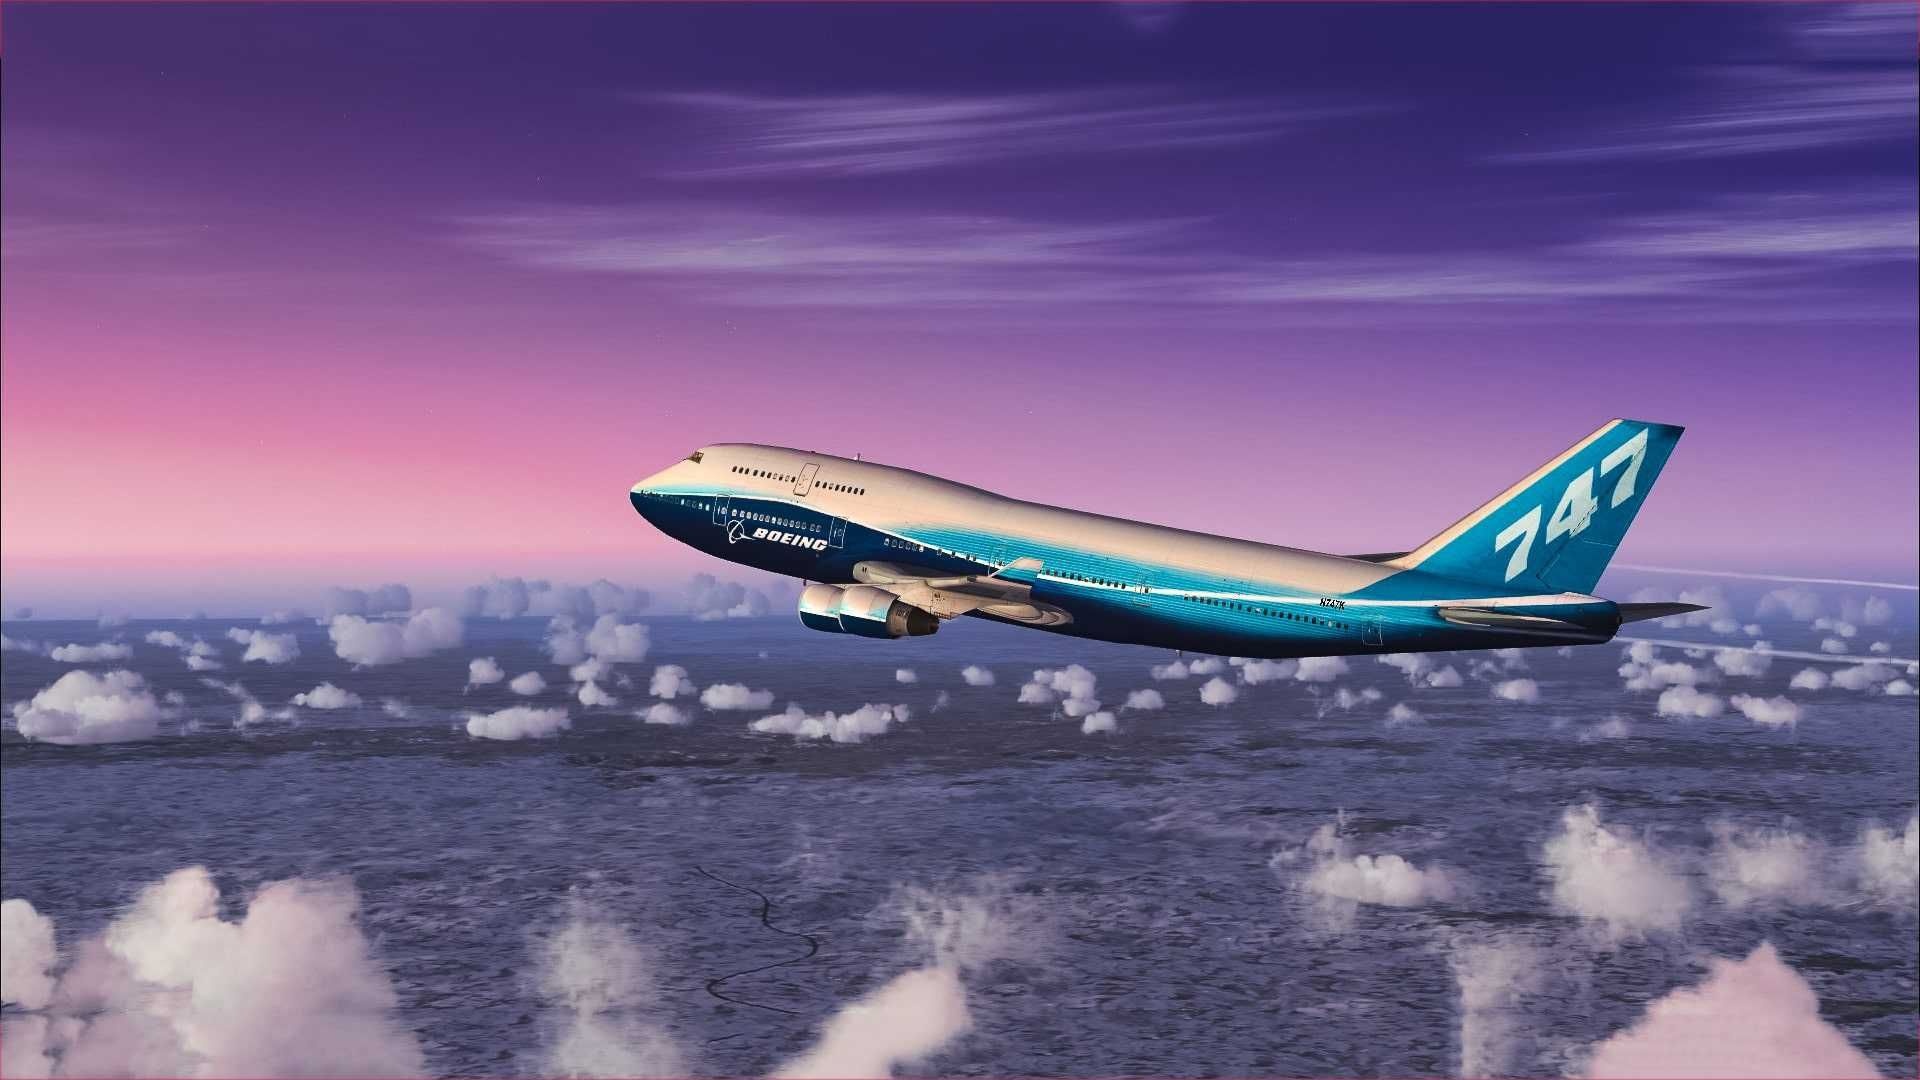 Boeing 747, Aerial magnificence, Air travel inspiration, Captivating views, 1920x1080 Full HD Desktop